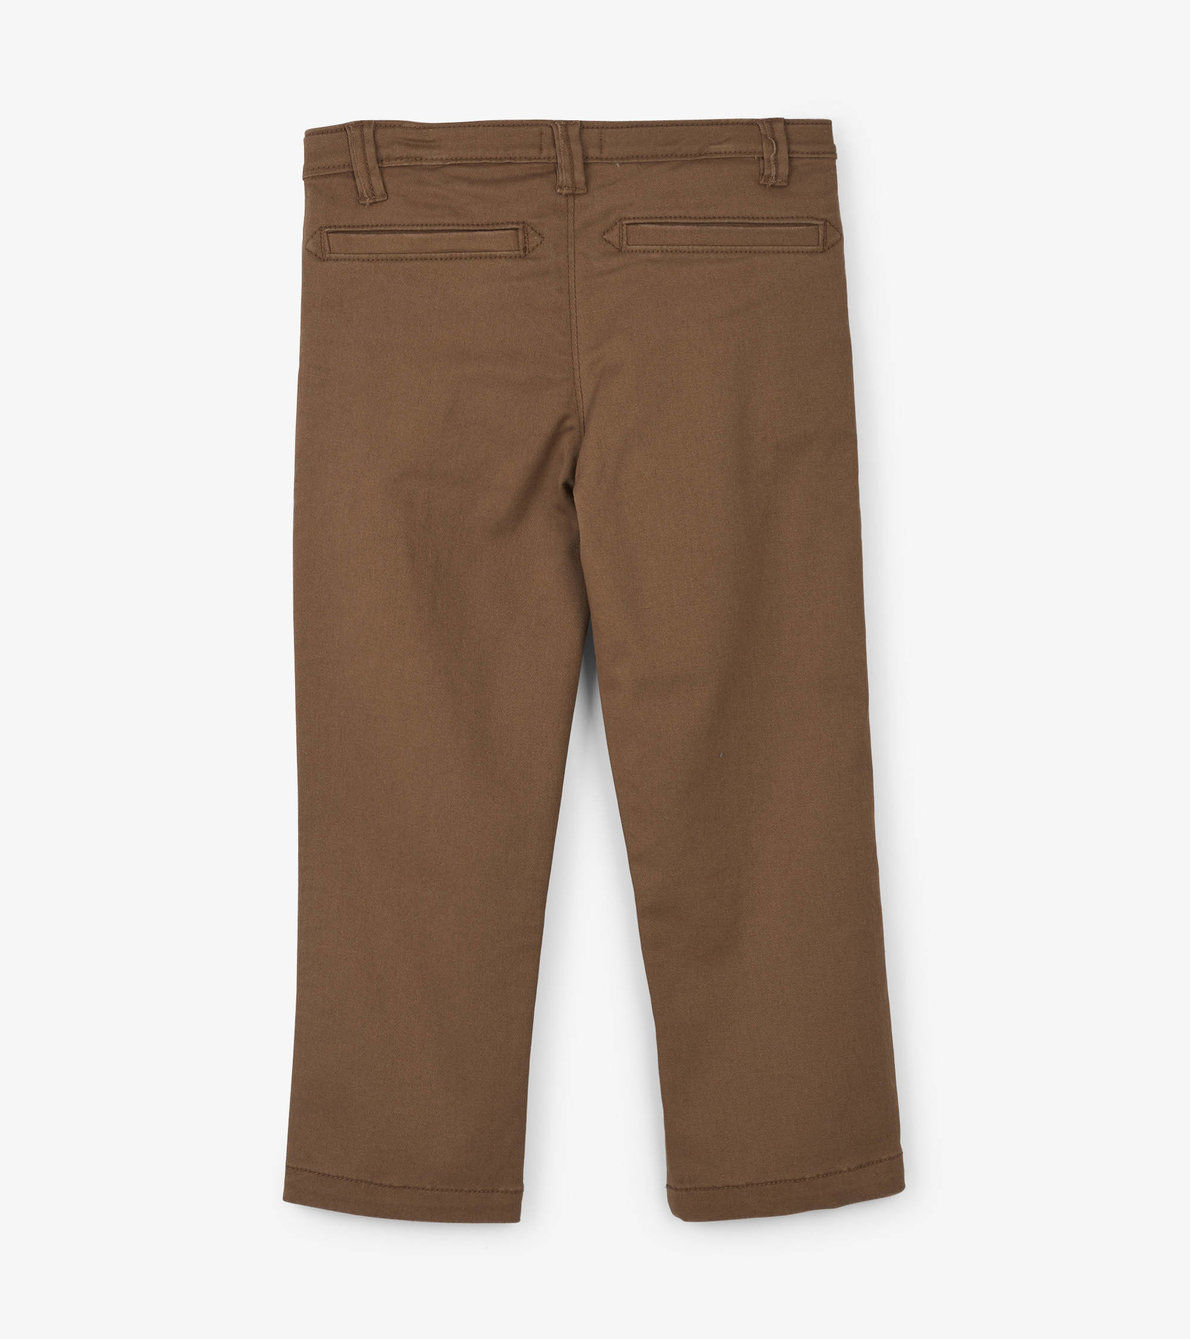 View larger image of Khaki Stretch Twill Pants